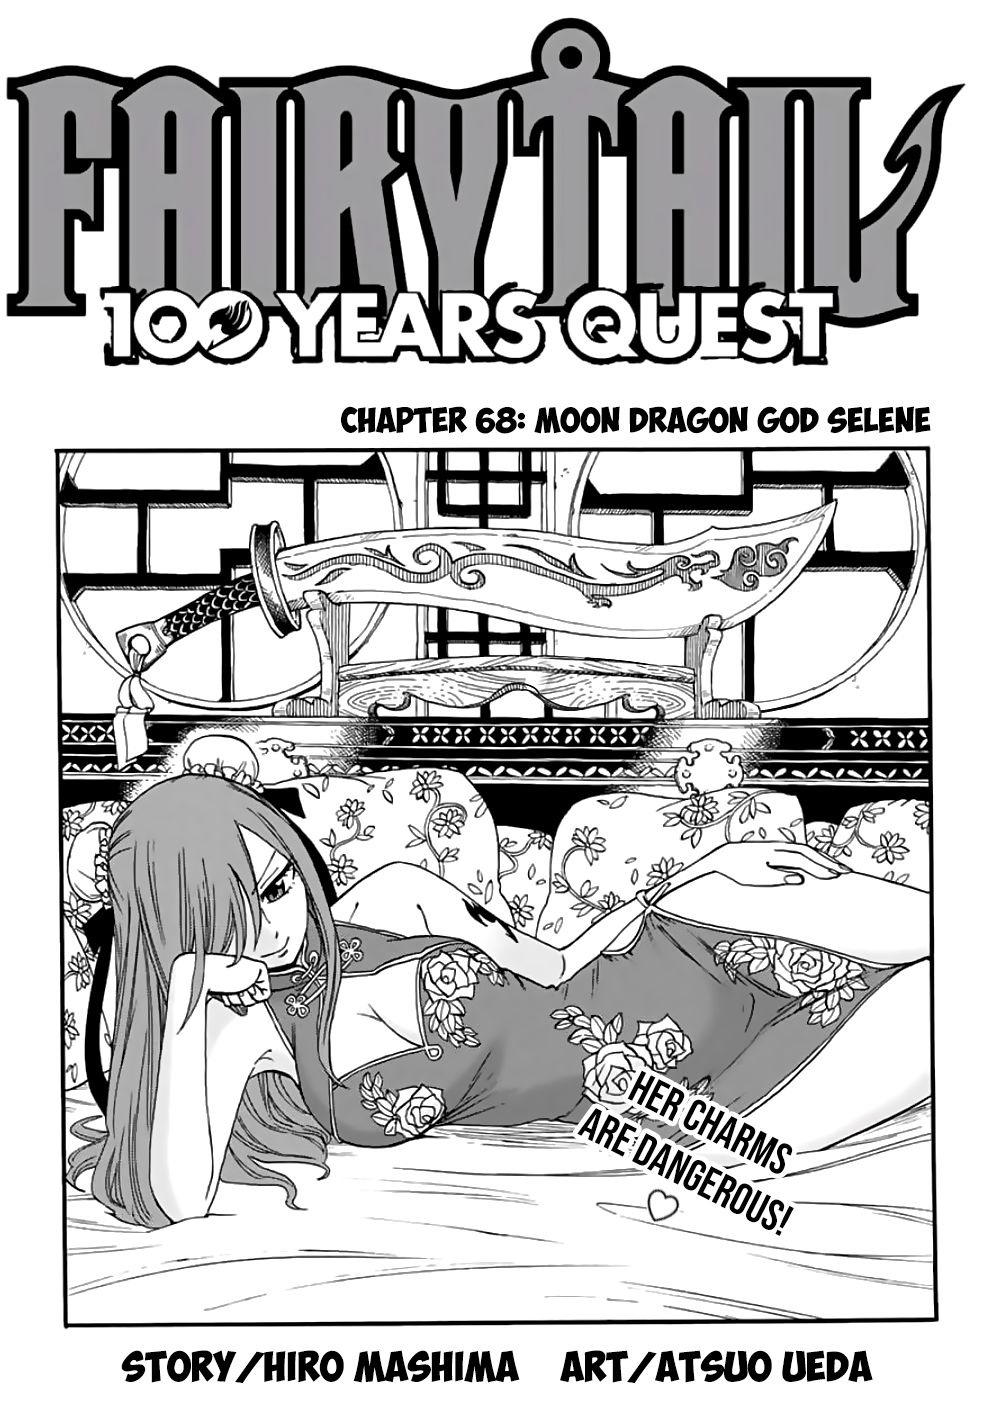 Fairy Tail 100 Years Quest Chapter 68 Moon Dragon God Selene